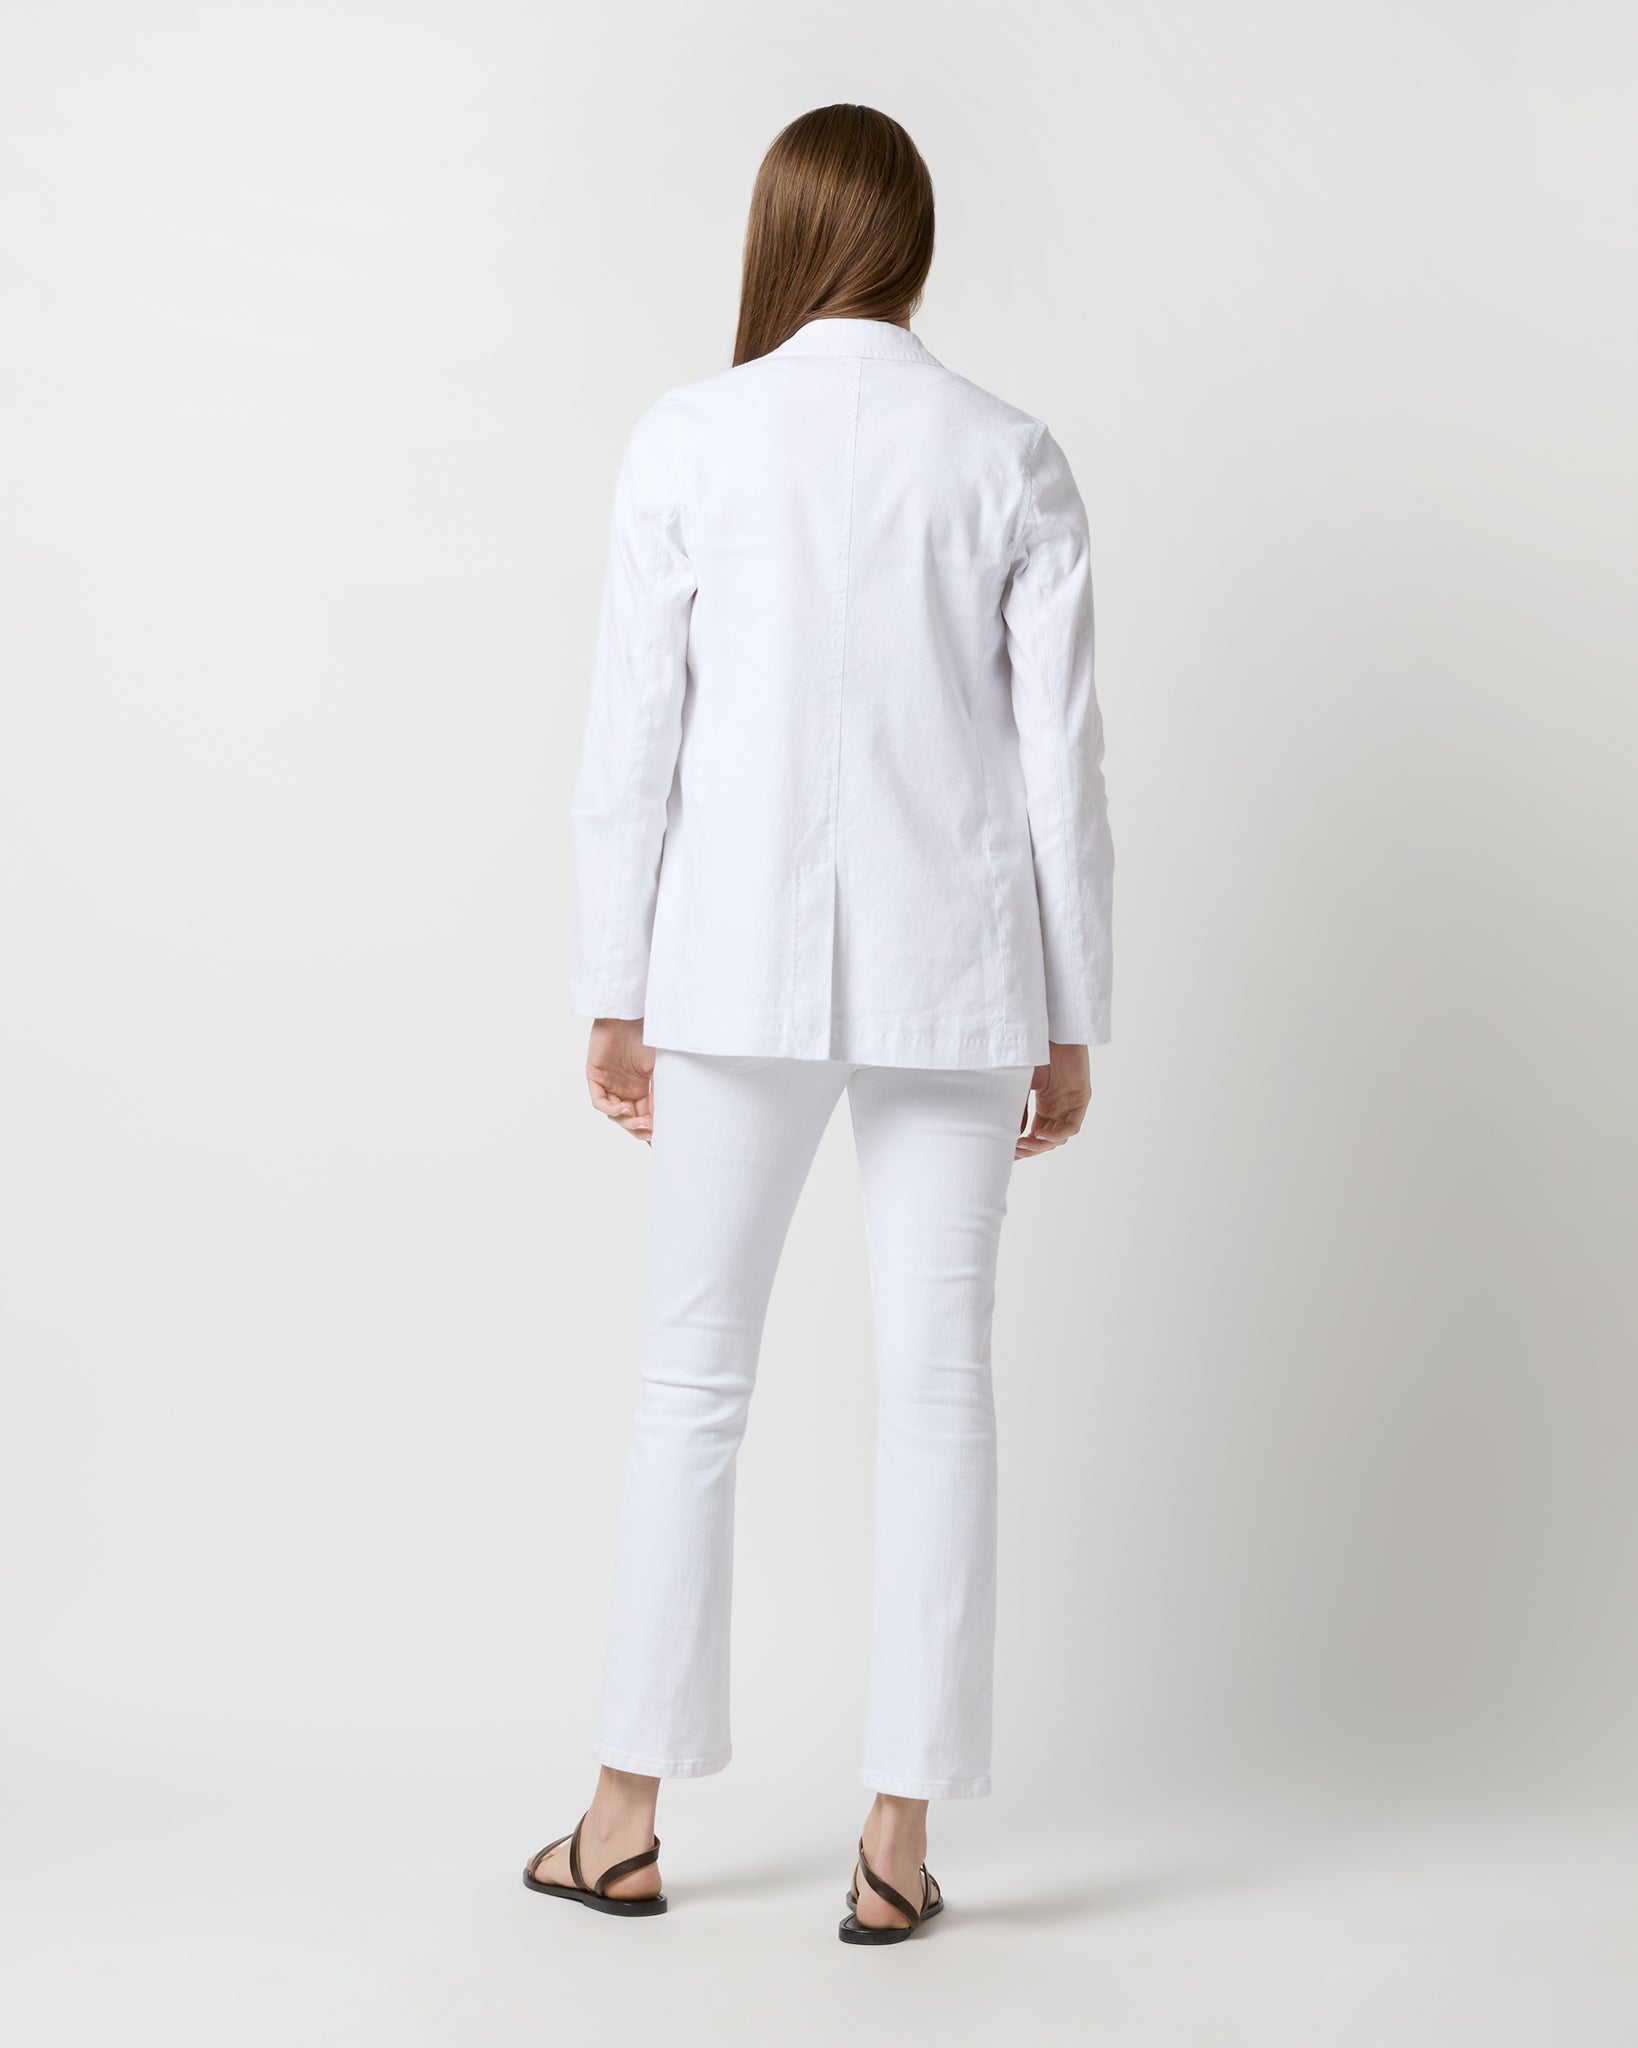 Constance Jacket in White Stretch Cotolino